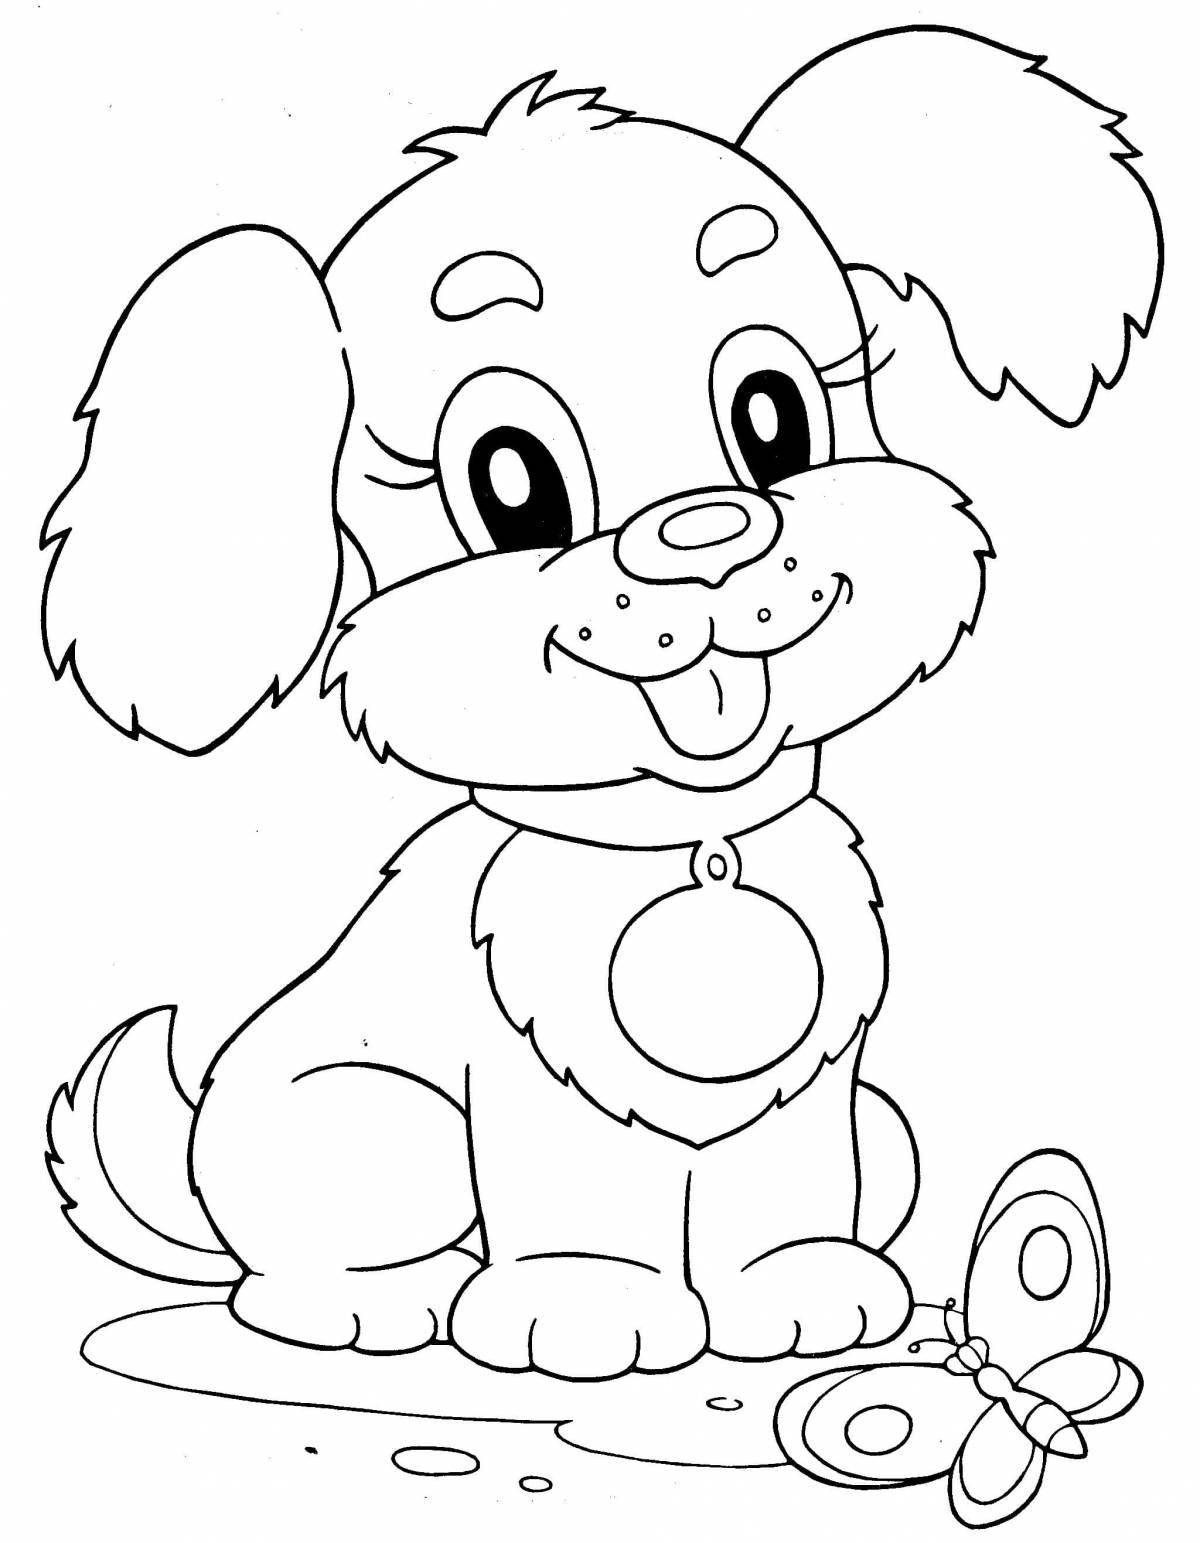 Playing puppy coloring page